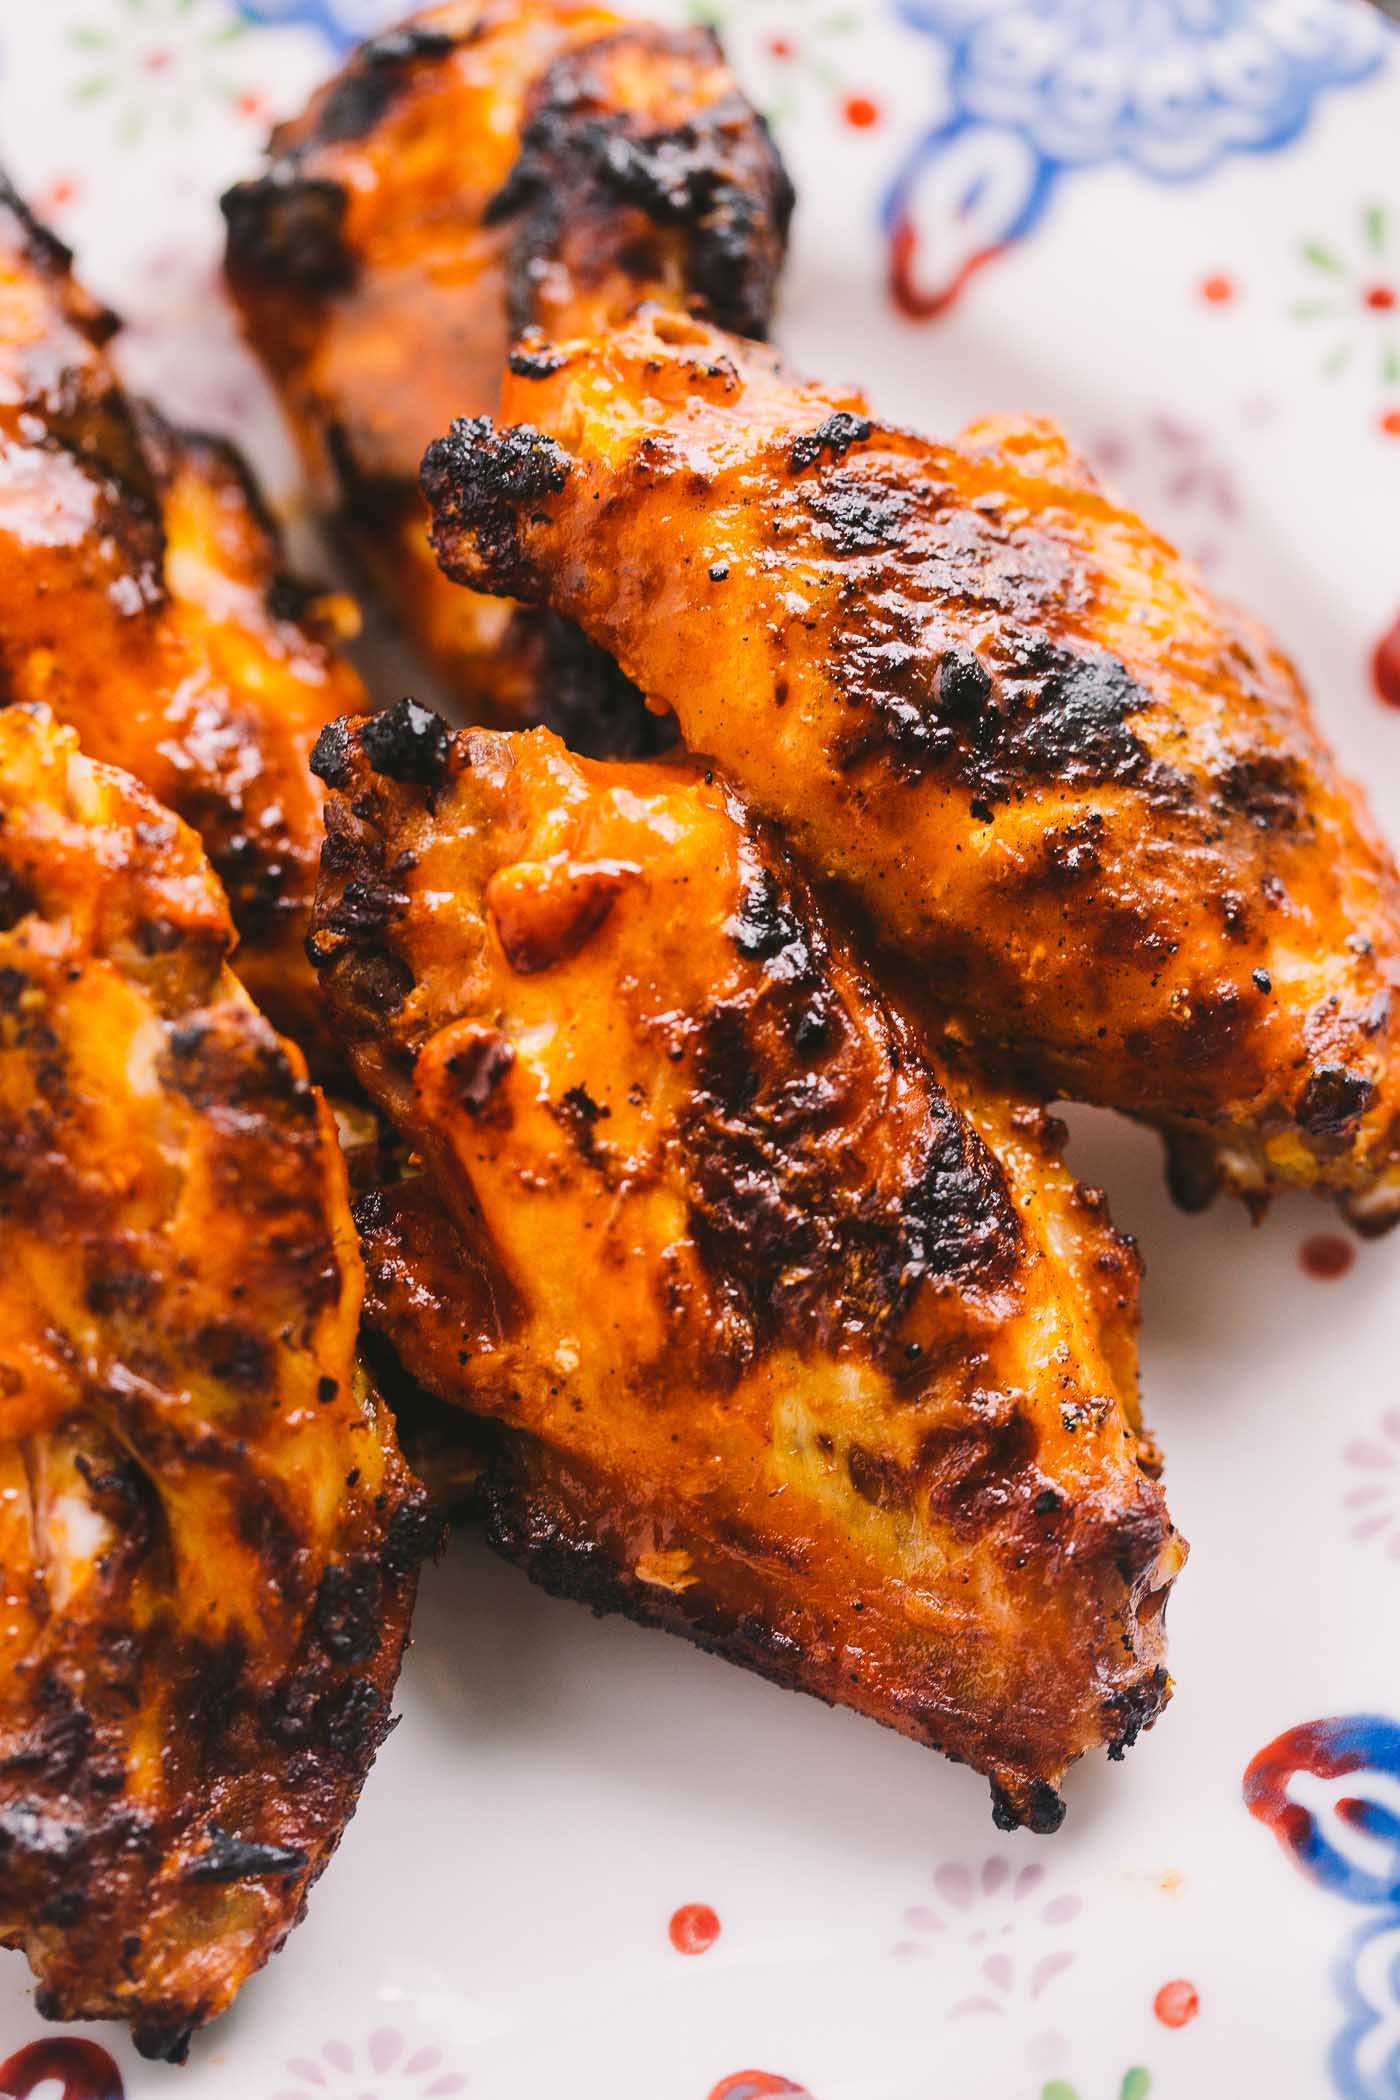 Best Receipe For Chicken Wings On Charcoal : Our Best Chicken Wing ...